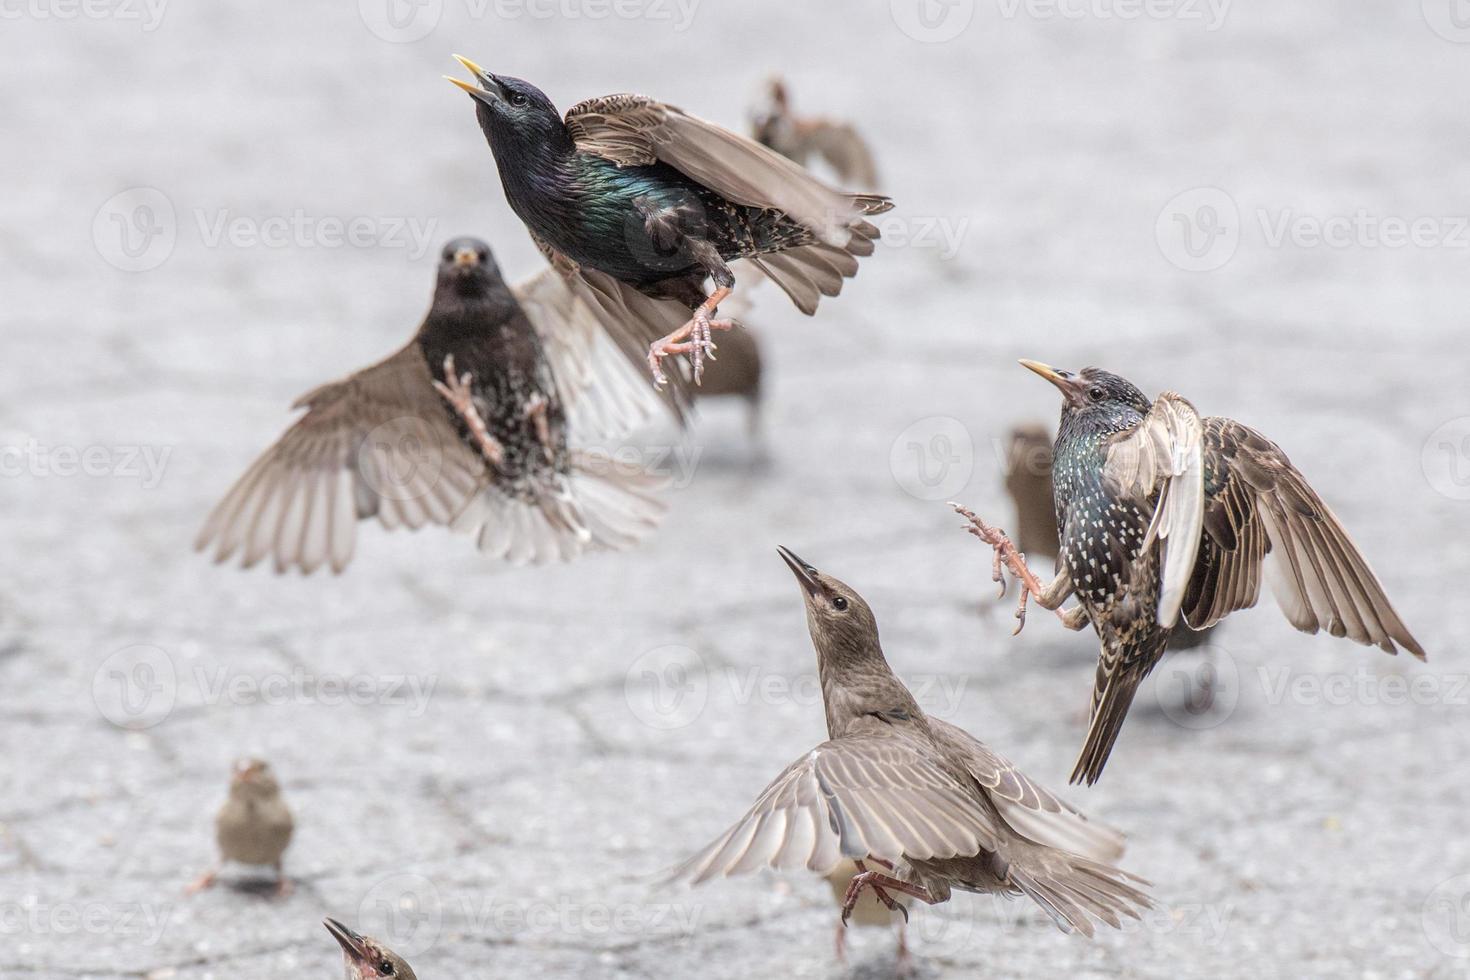 Birds fighting for food close up detail photo